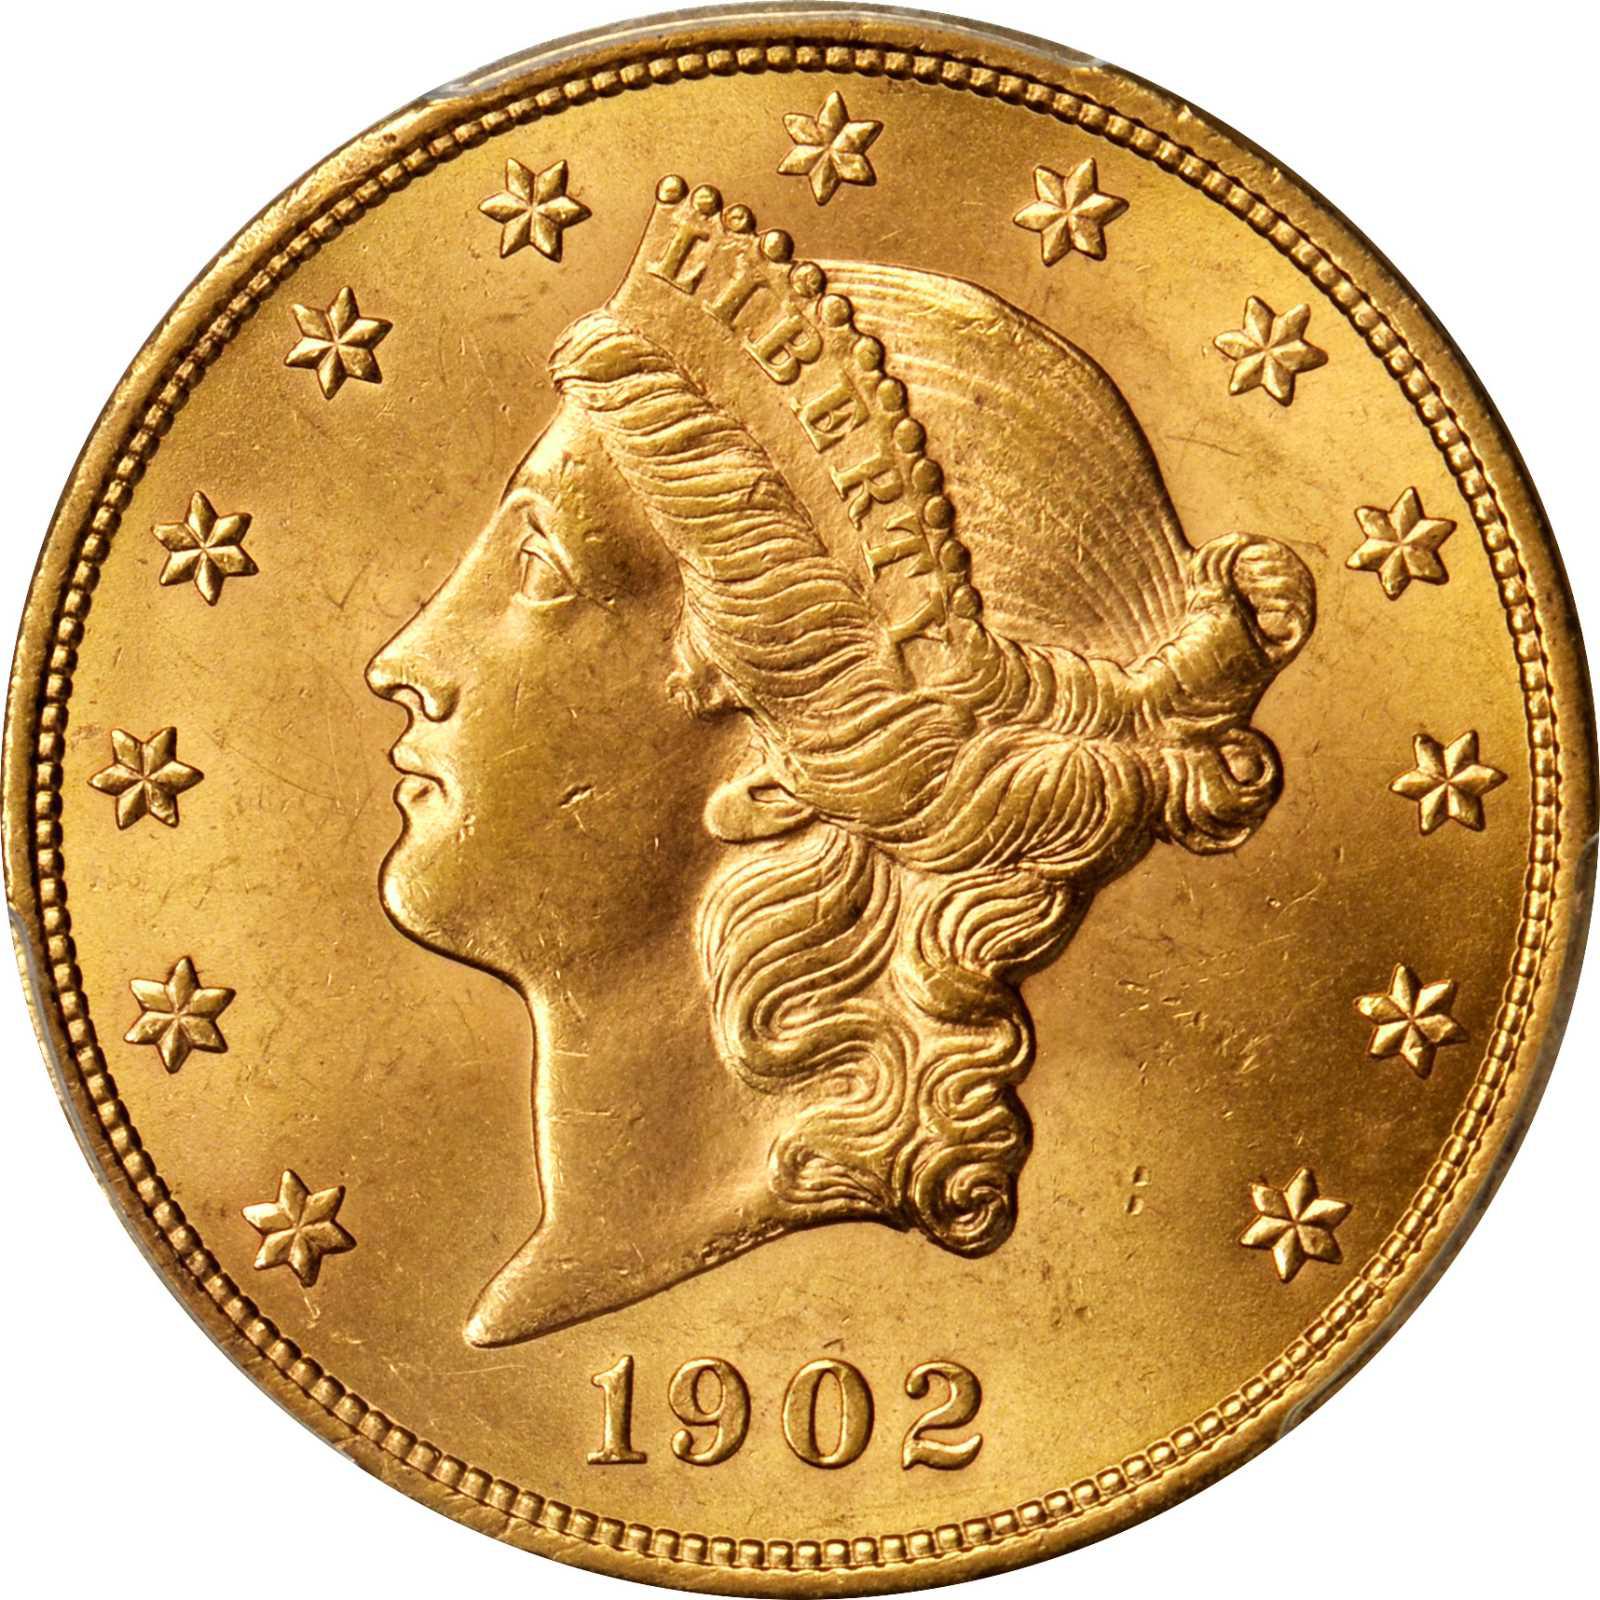 How Much Is A 20 Liberty Gold Coin Worth